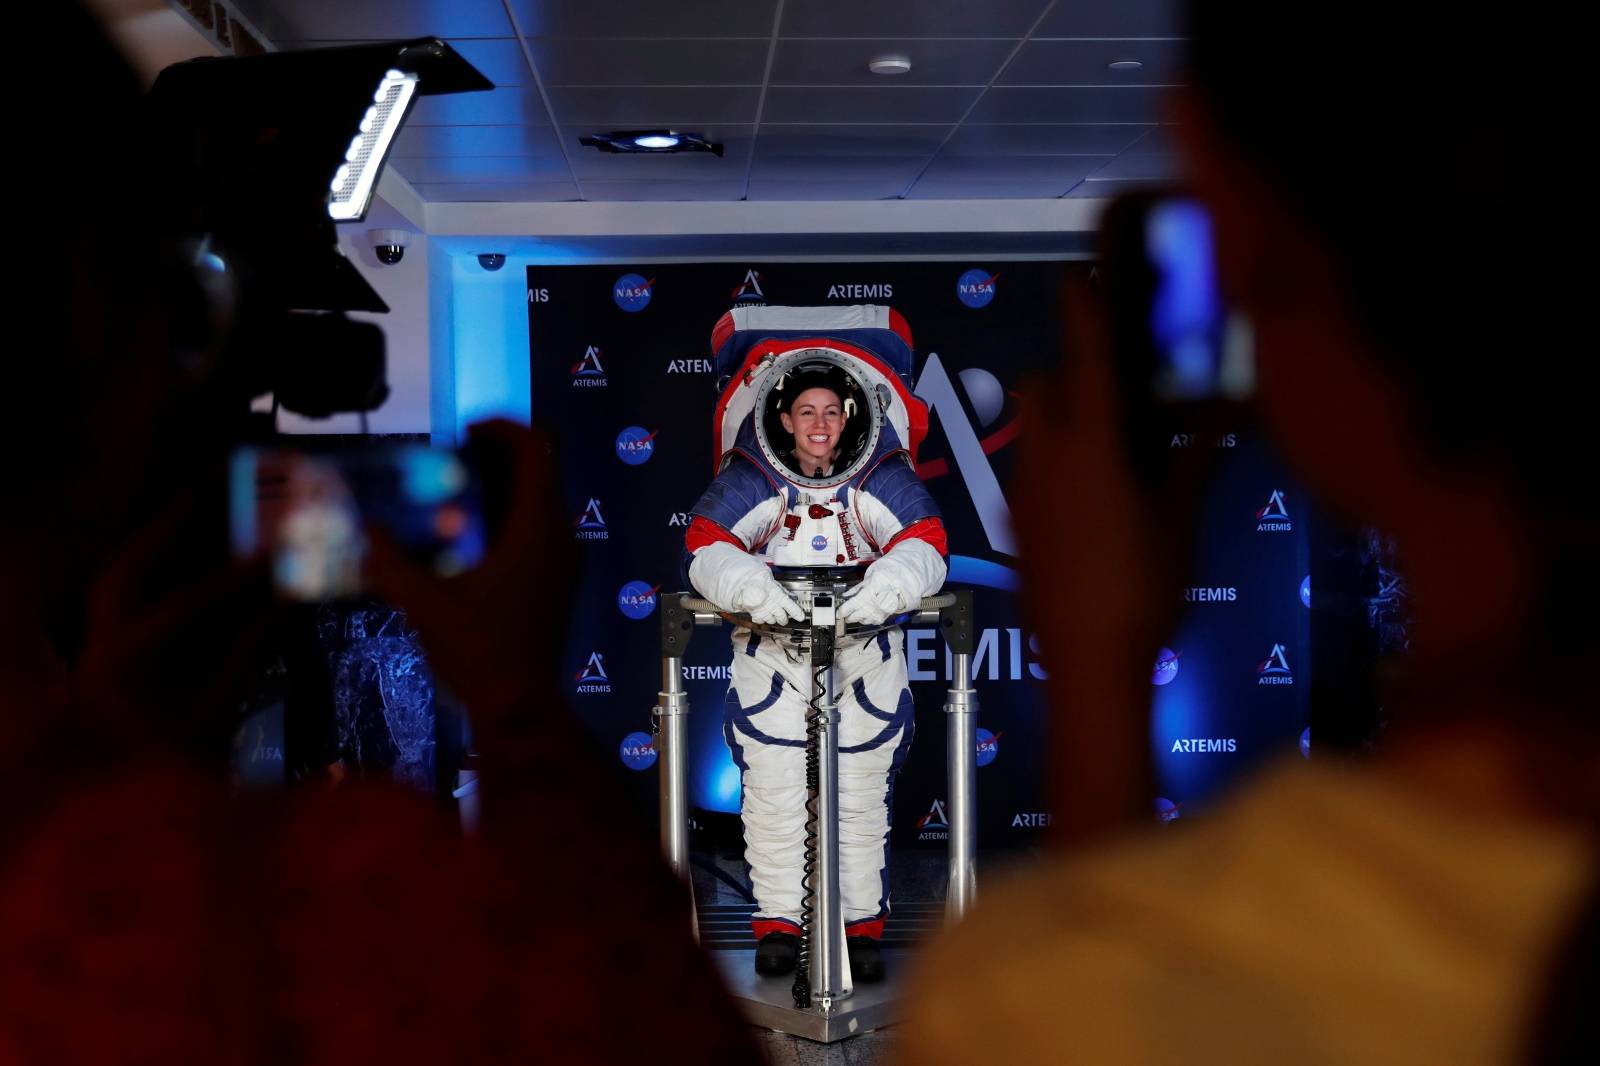 Visitors take pictures of Advanced Space Suit Engineer at NASA Kristine Davis as she wears the xEMU prototype space suit for the next astronaut to the moon by 2024,  during its presentation at NASA headquarters in Washington